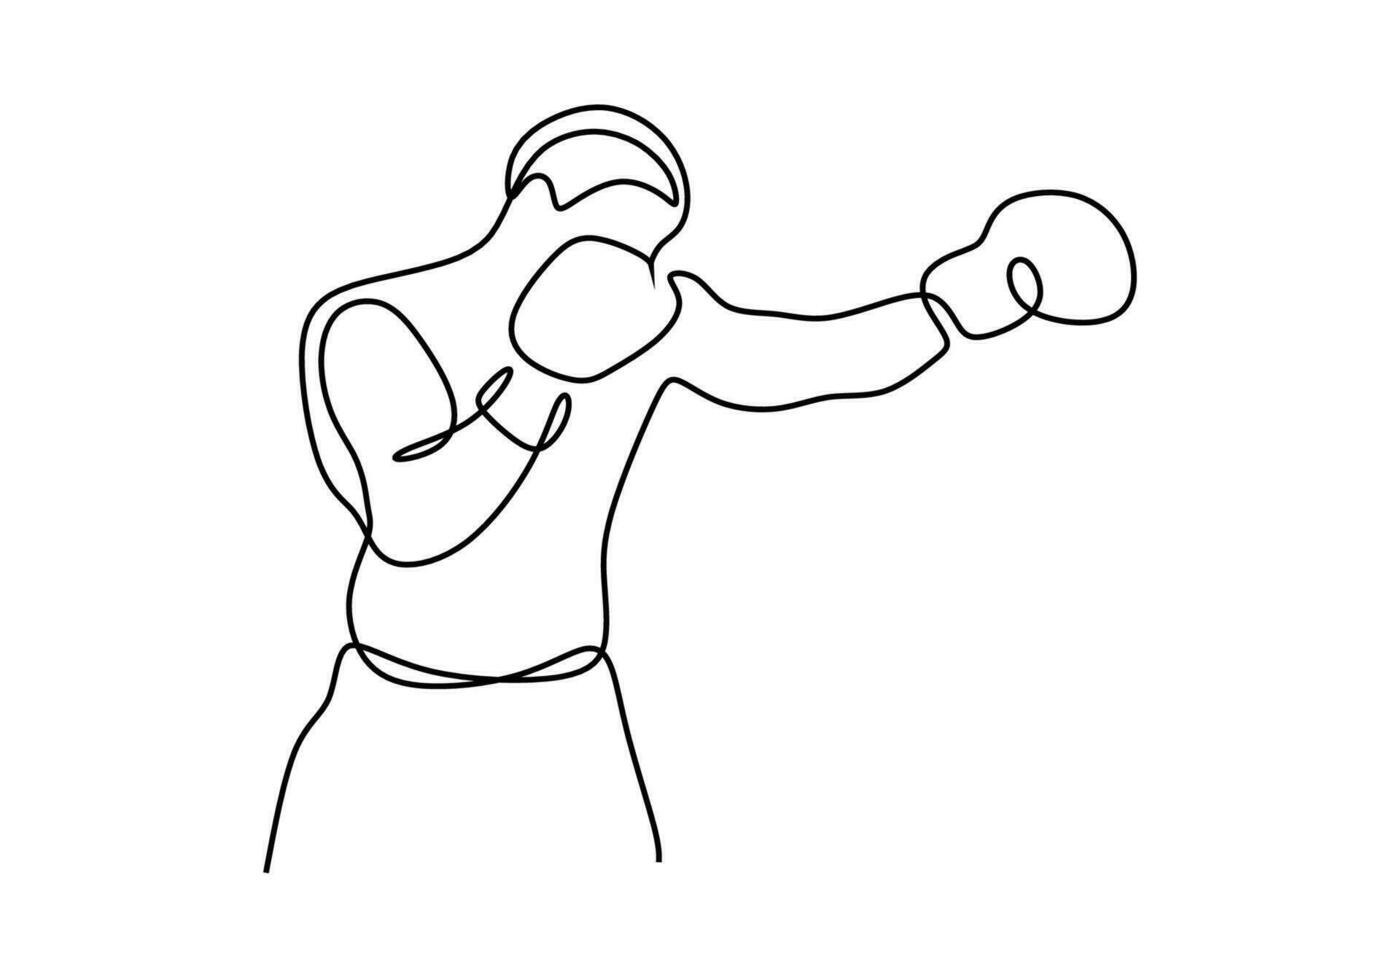 Boxer one line drawing, punch pose continuous hand drawn sketch art. vector